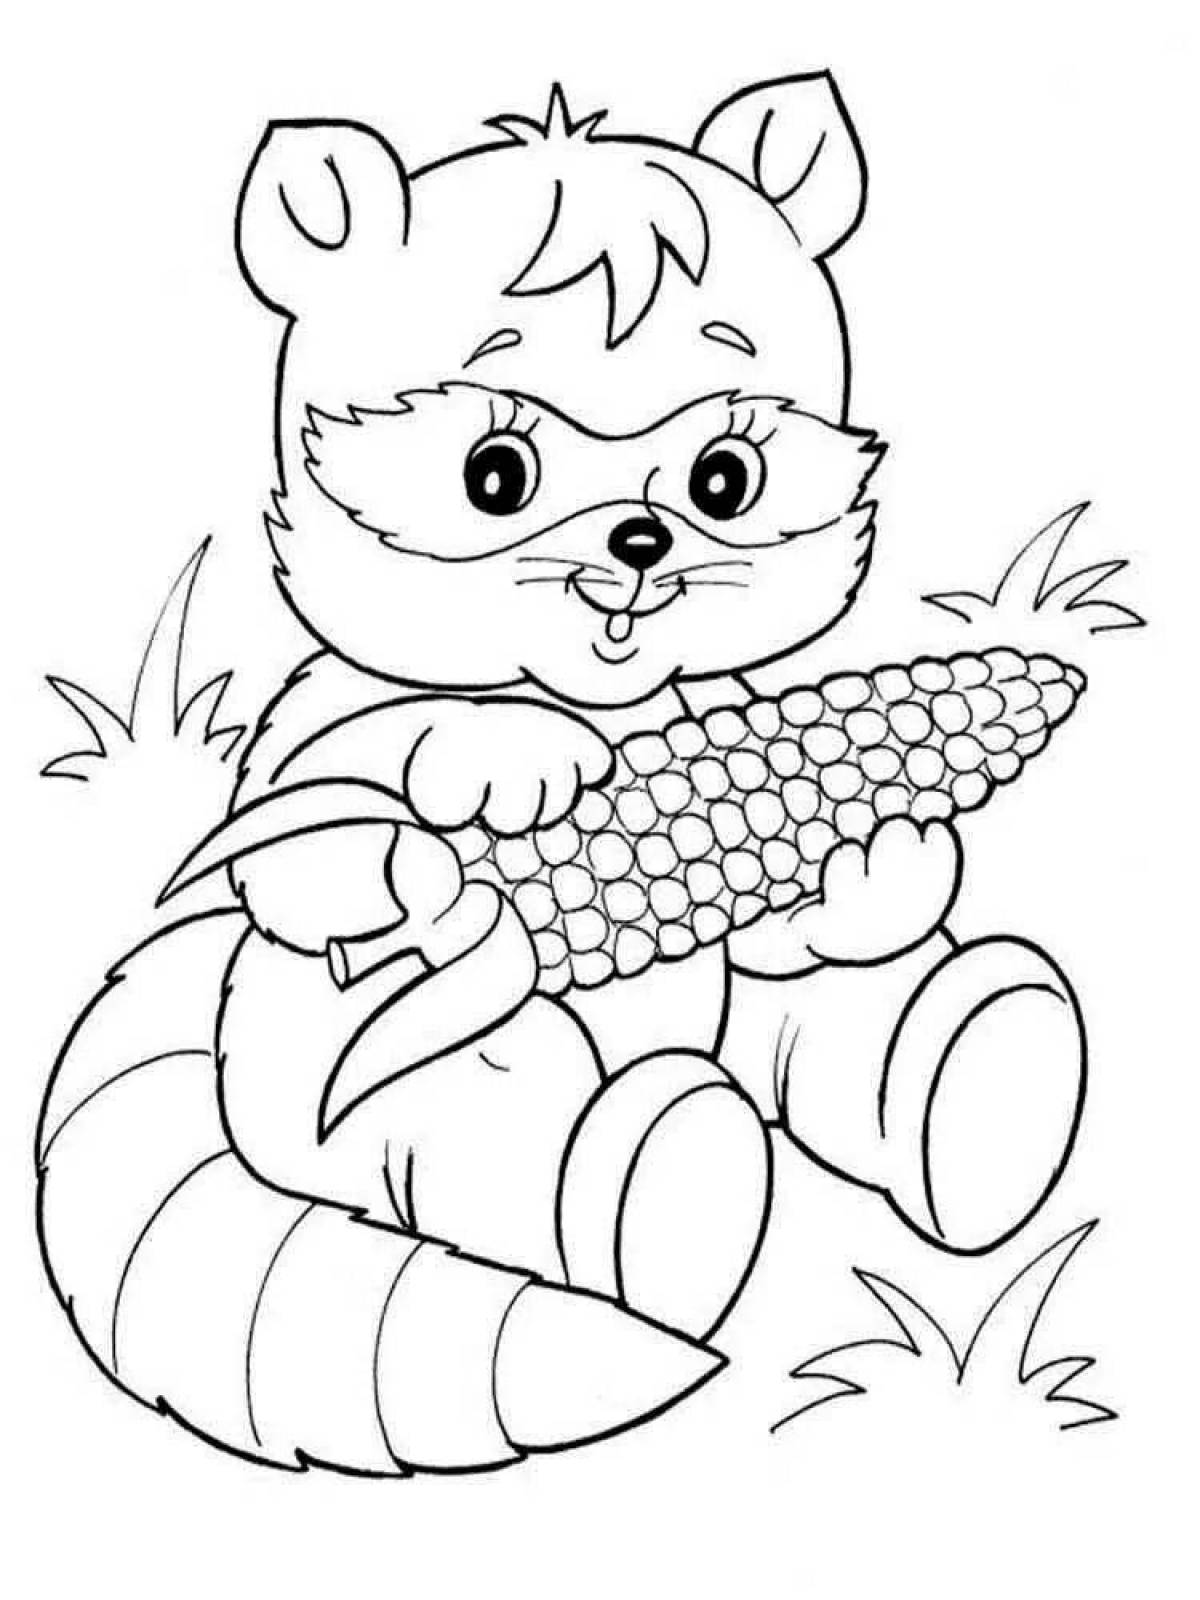 Fancy coloring page 5 6